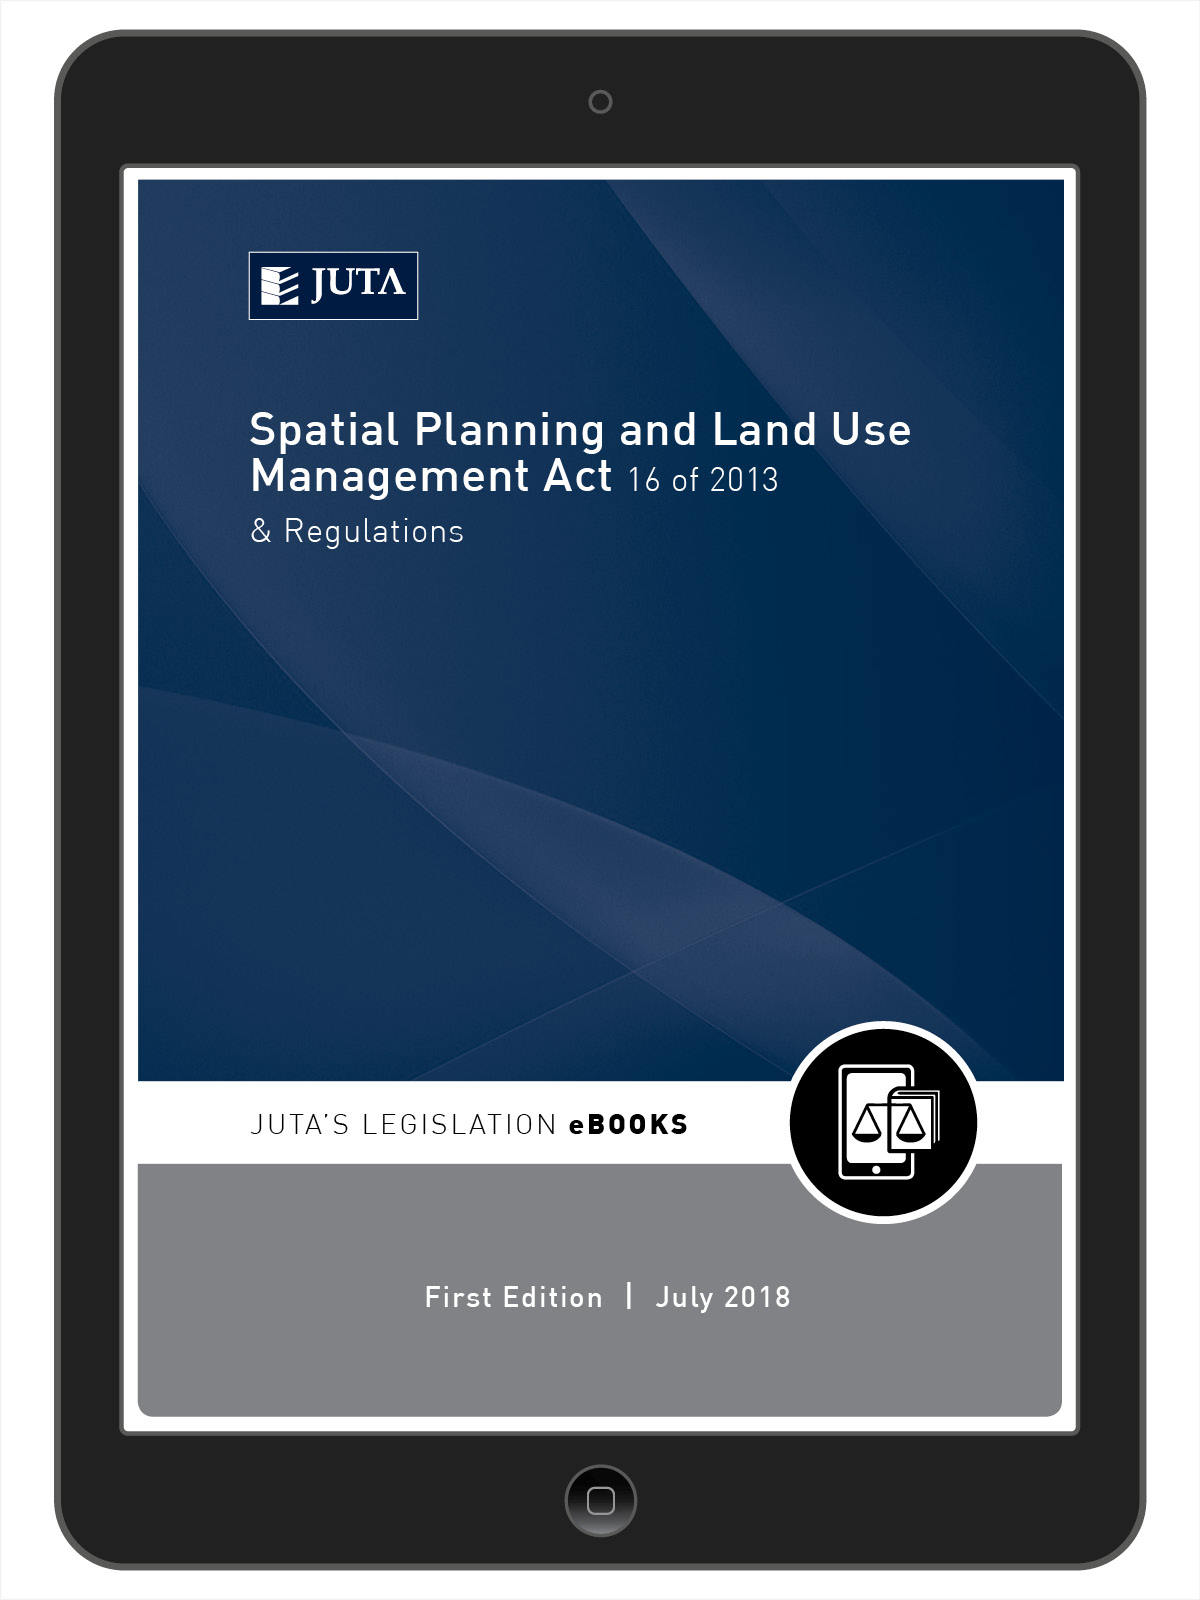 Spatial Planning and Land Use Management Act 16 of 2013 & Regulations